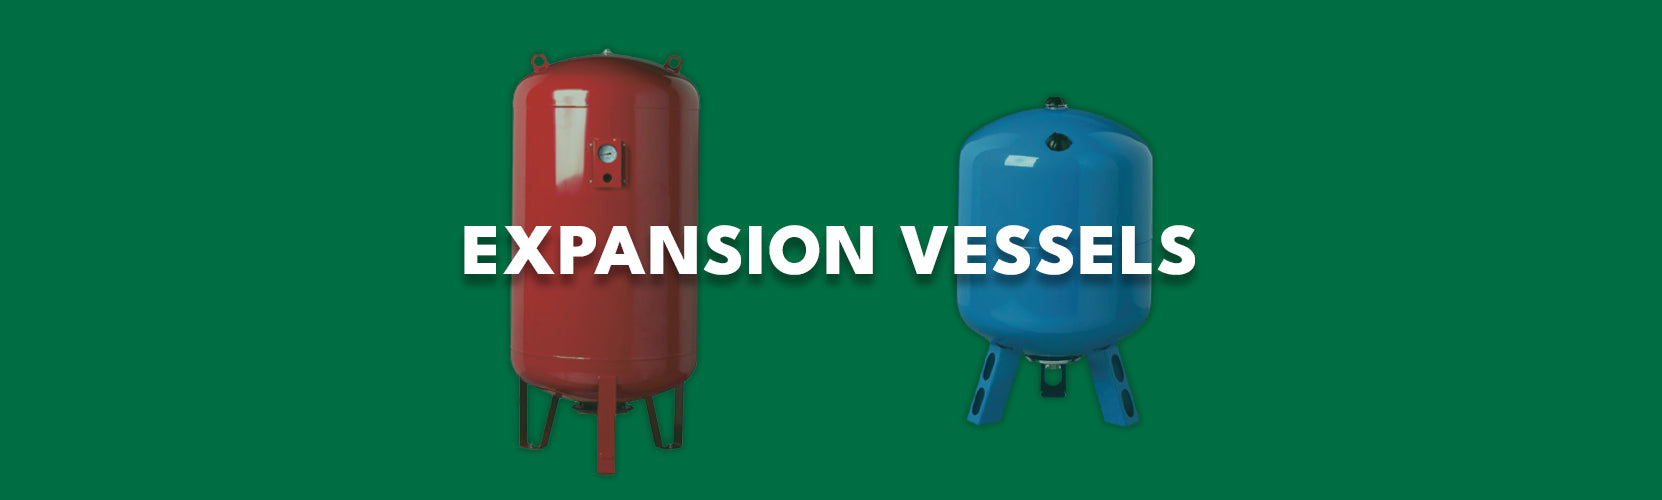 Expansion Vessels now availble at Safety Valves Online